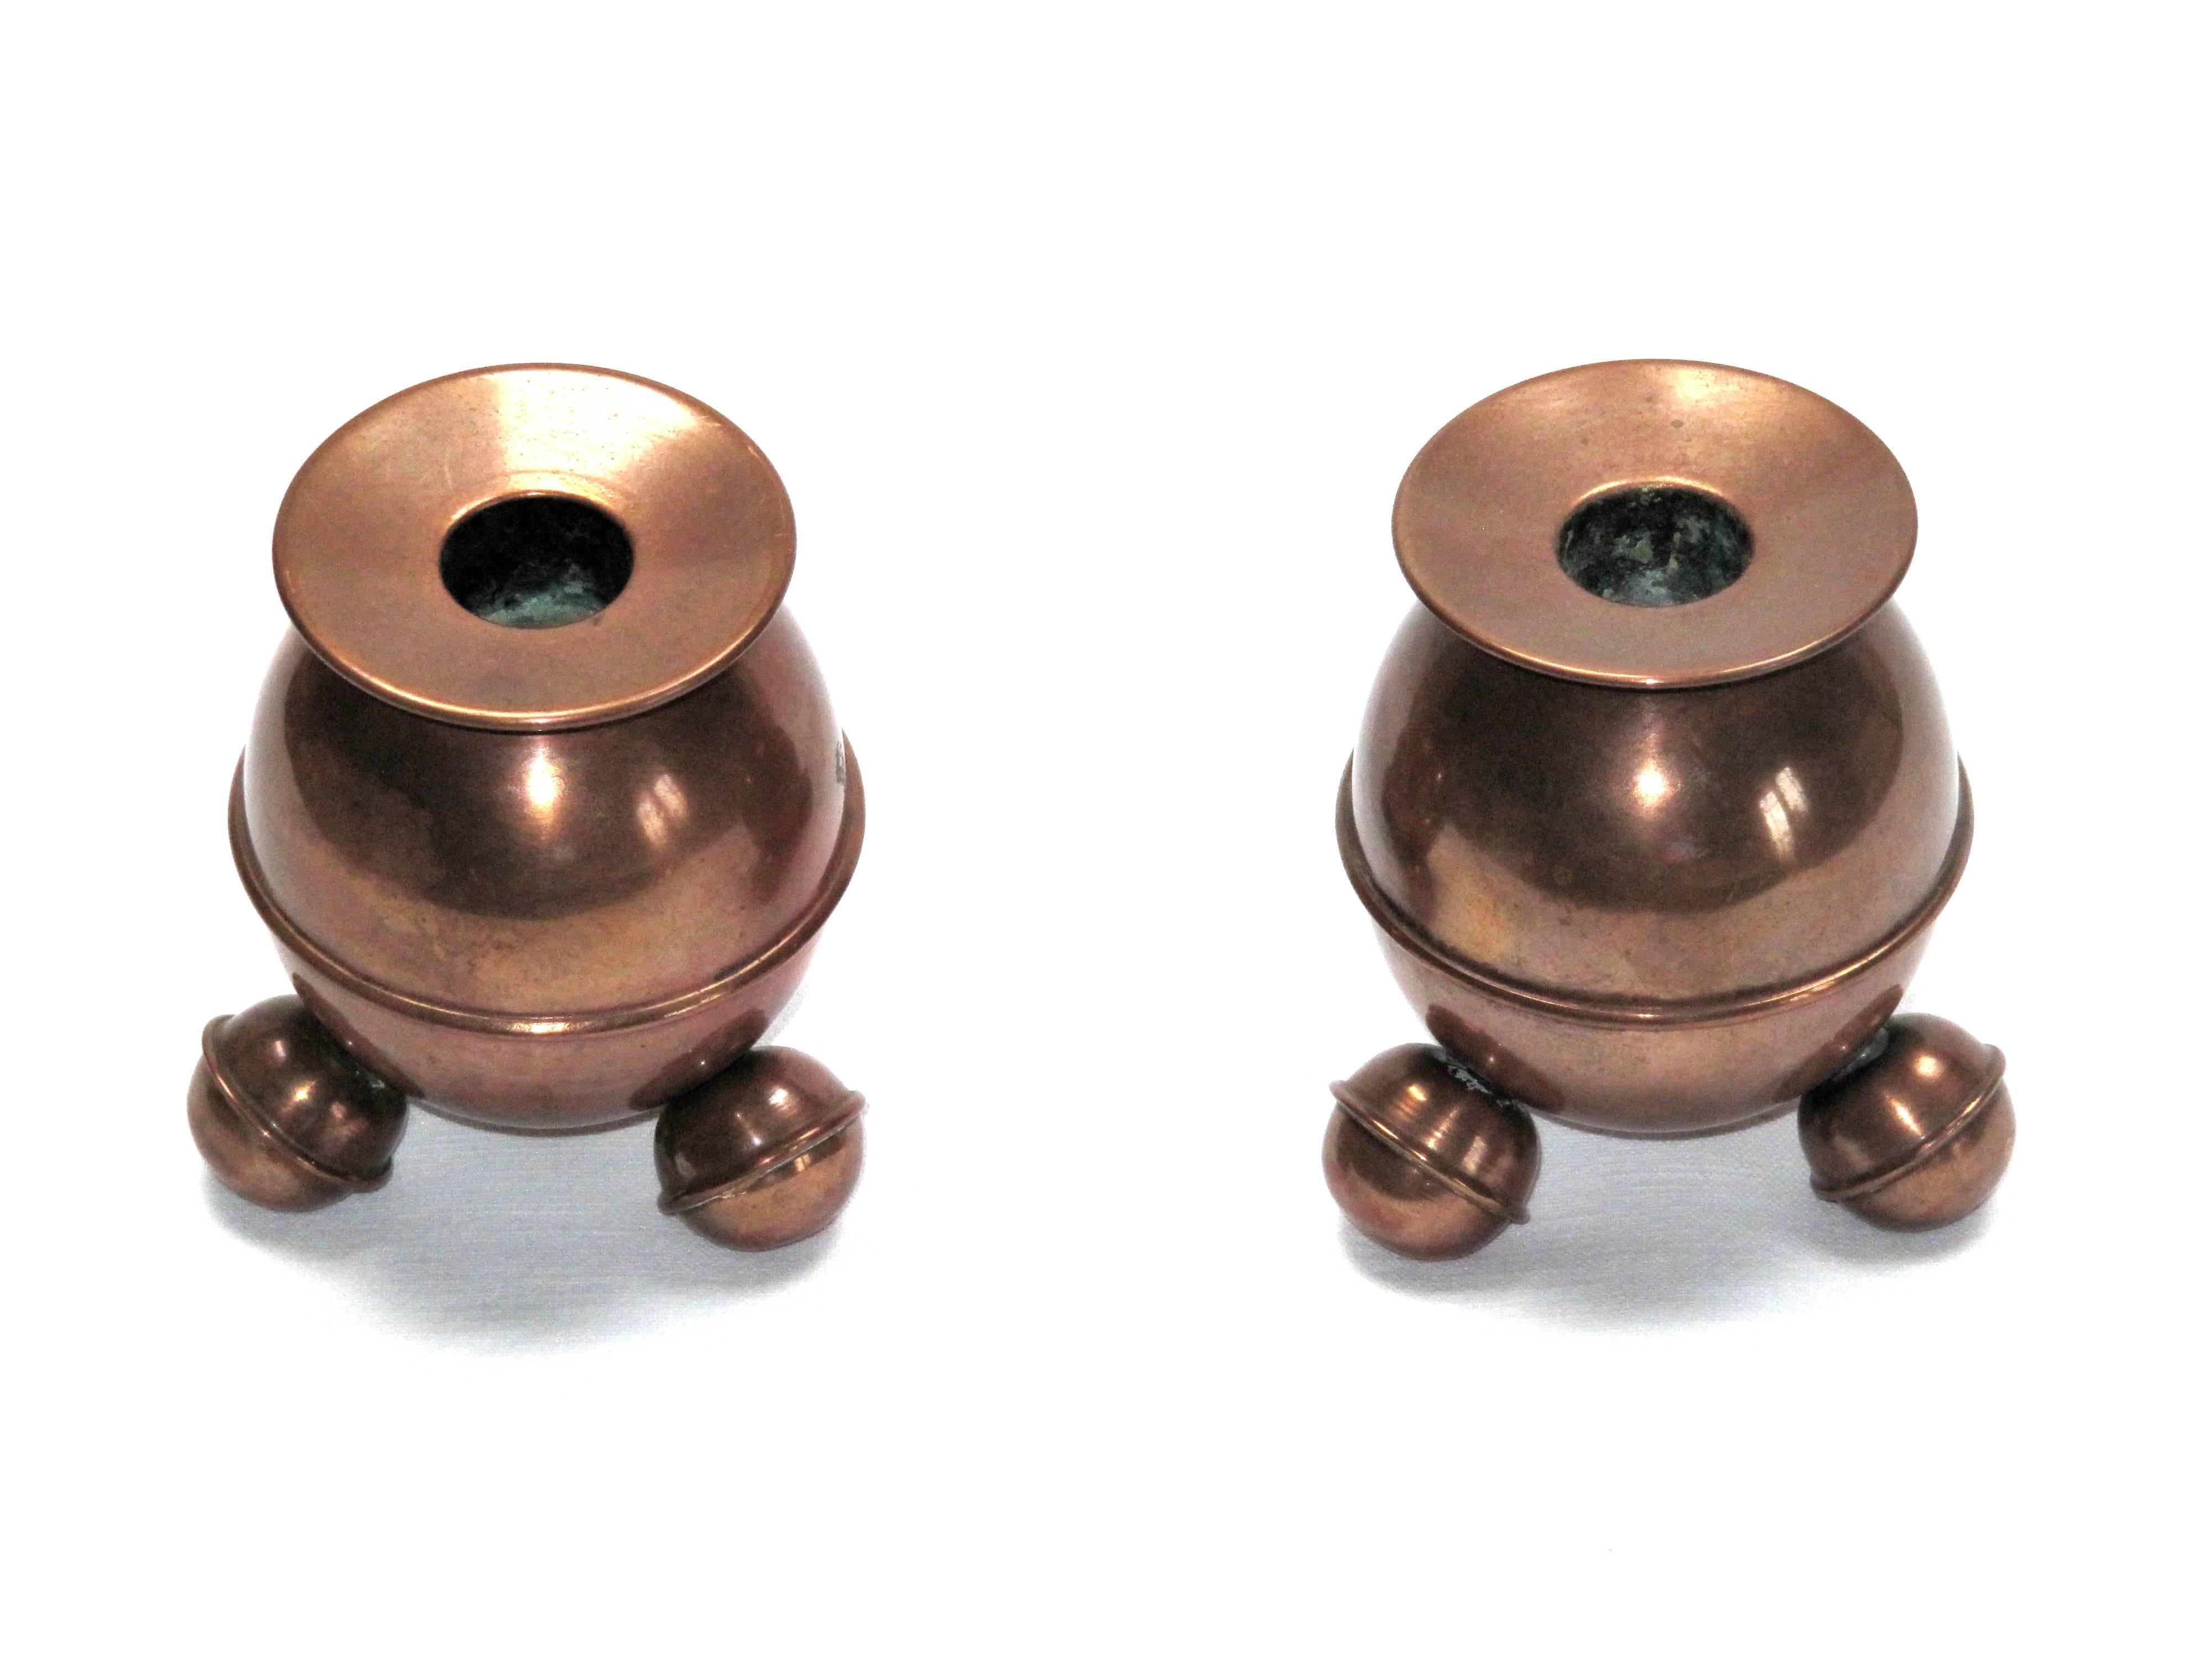 A pair of handmade Art Deco/Bauhaus candlestick made of copper - ball shape with three feet.
Attributed Naum Slutzky, from the Hamburg period, Germany. Art Deco brass candleholder, circa 1920s-1930s. Ball shape with three ball foots.
Excellent